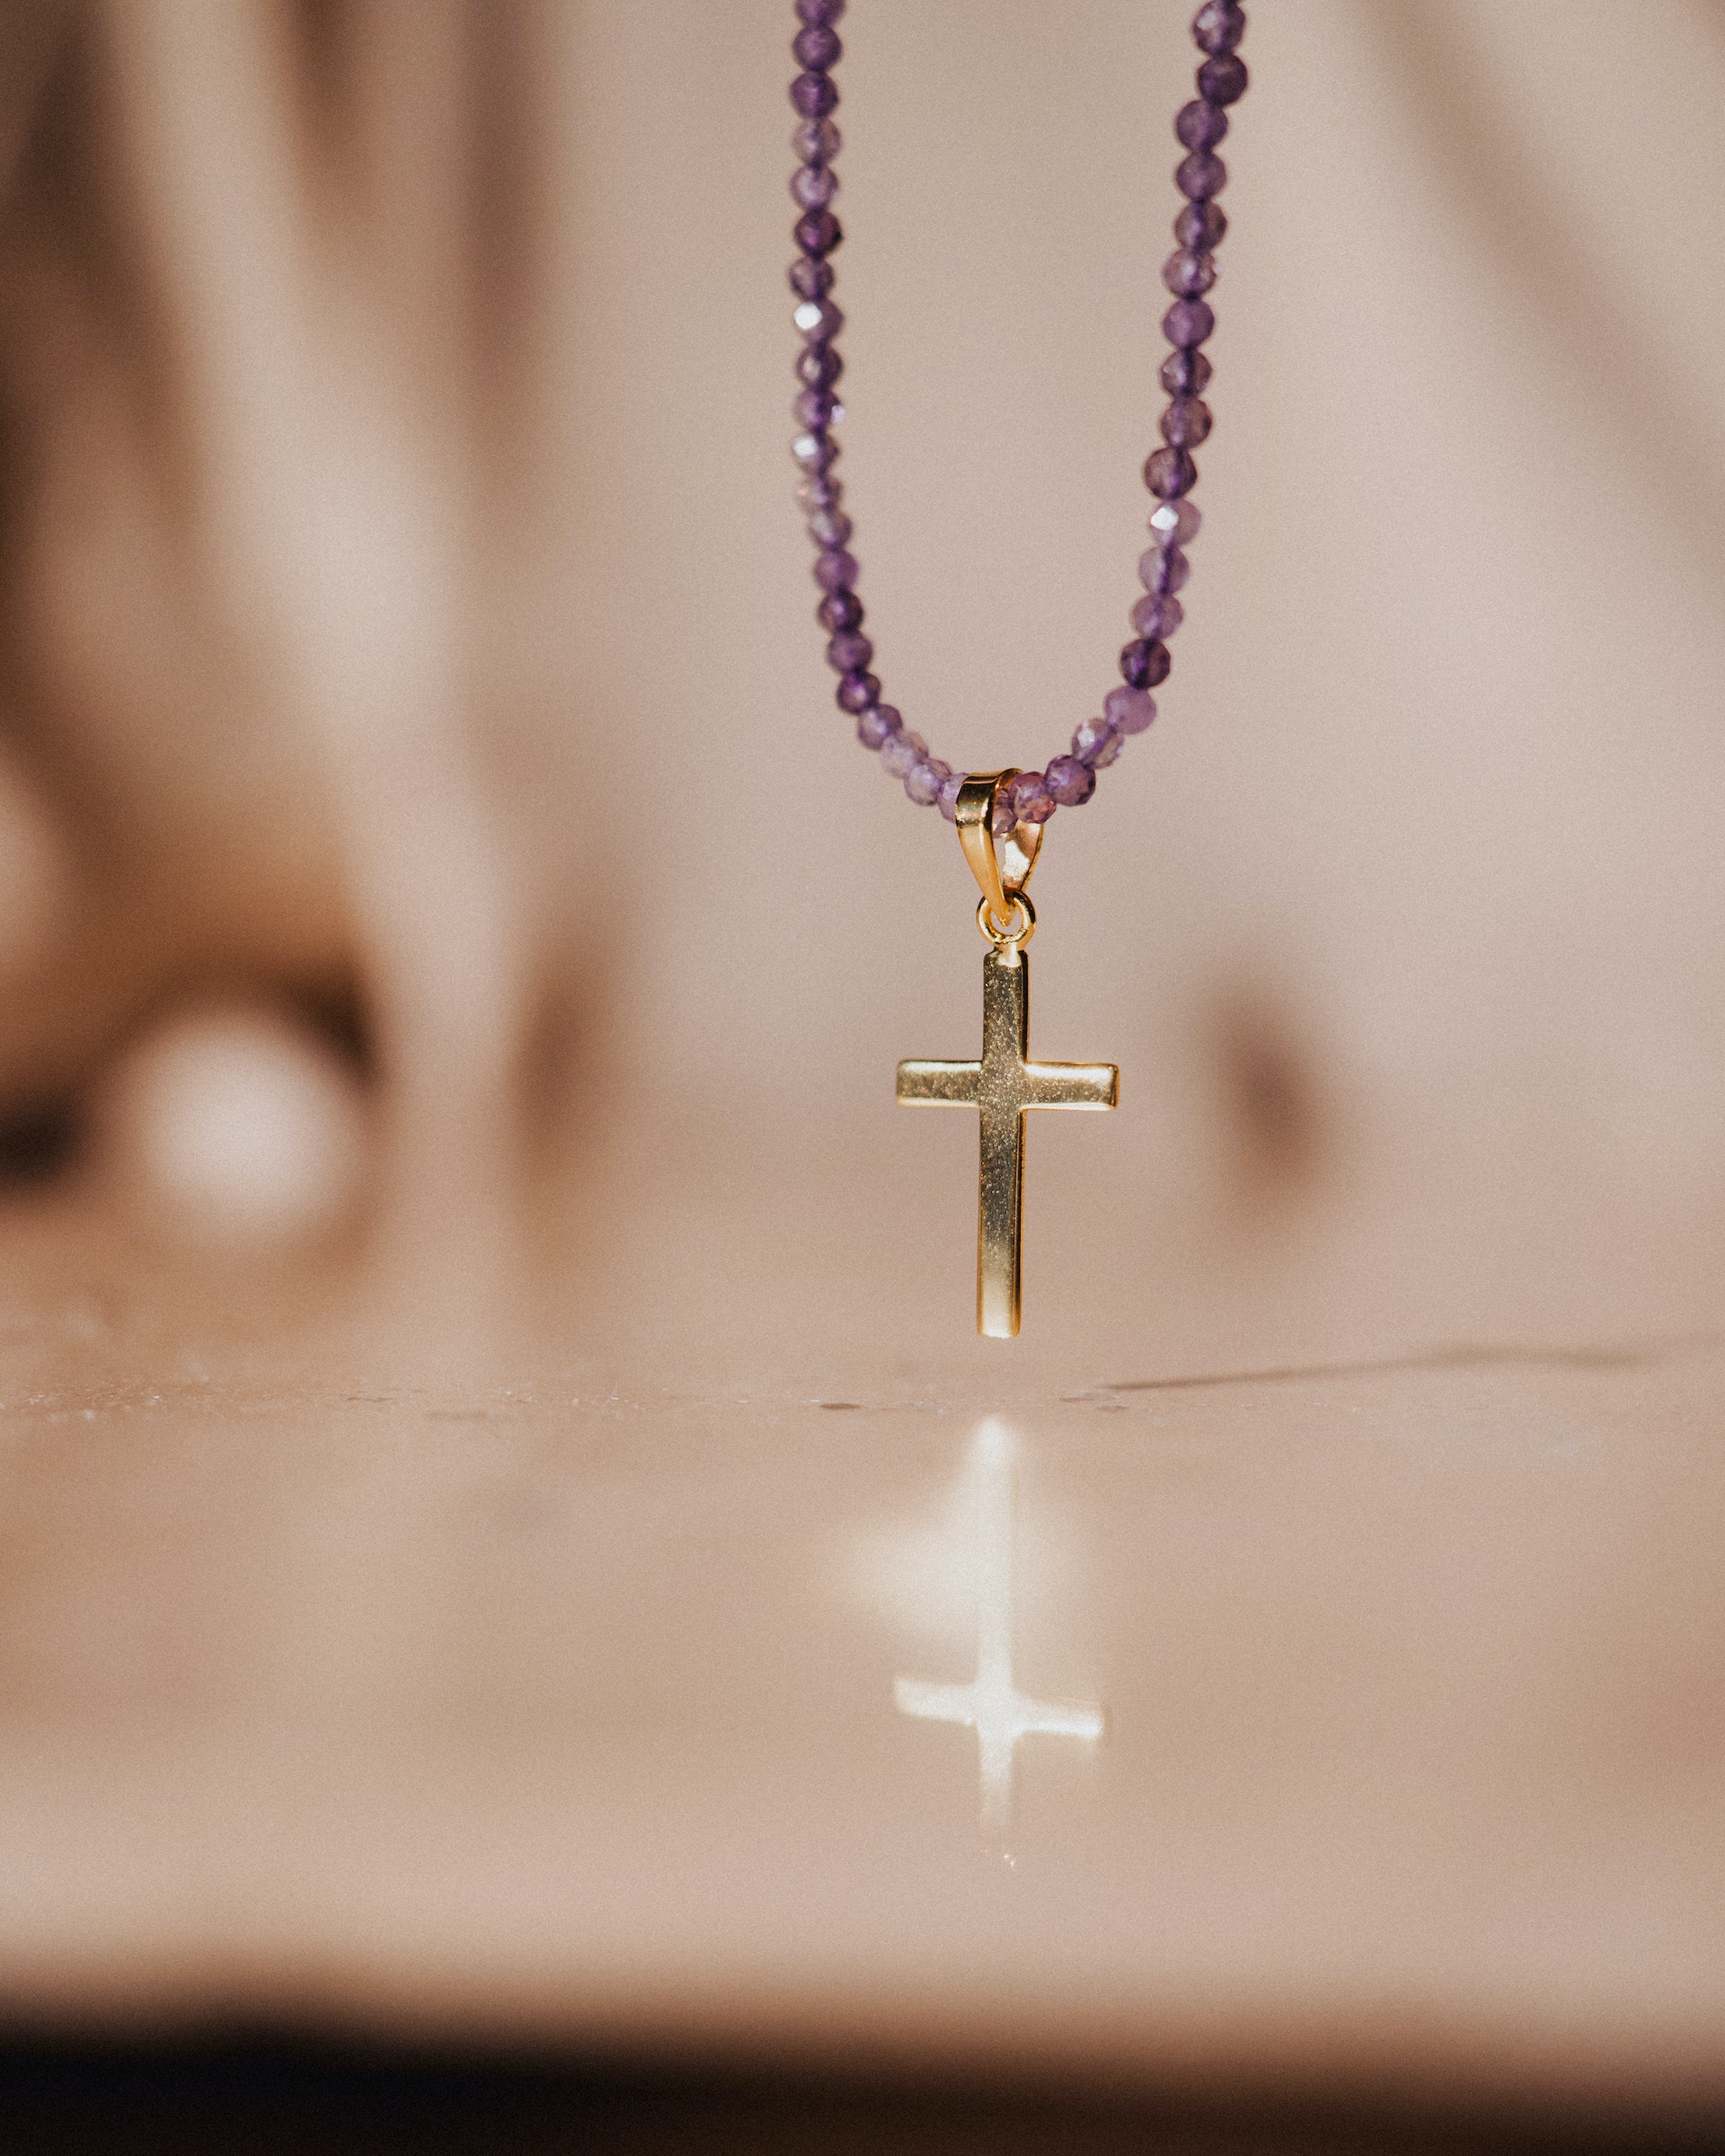 Close-up of a necklace with a cross pendant | Source: Pexels